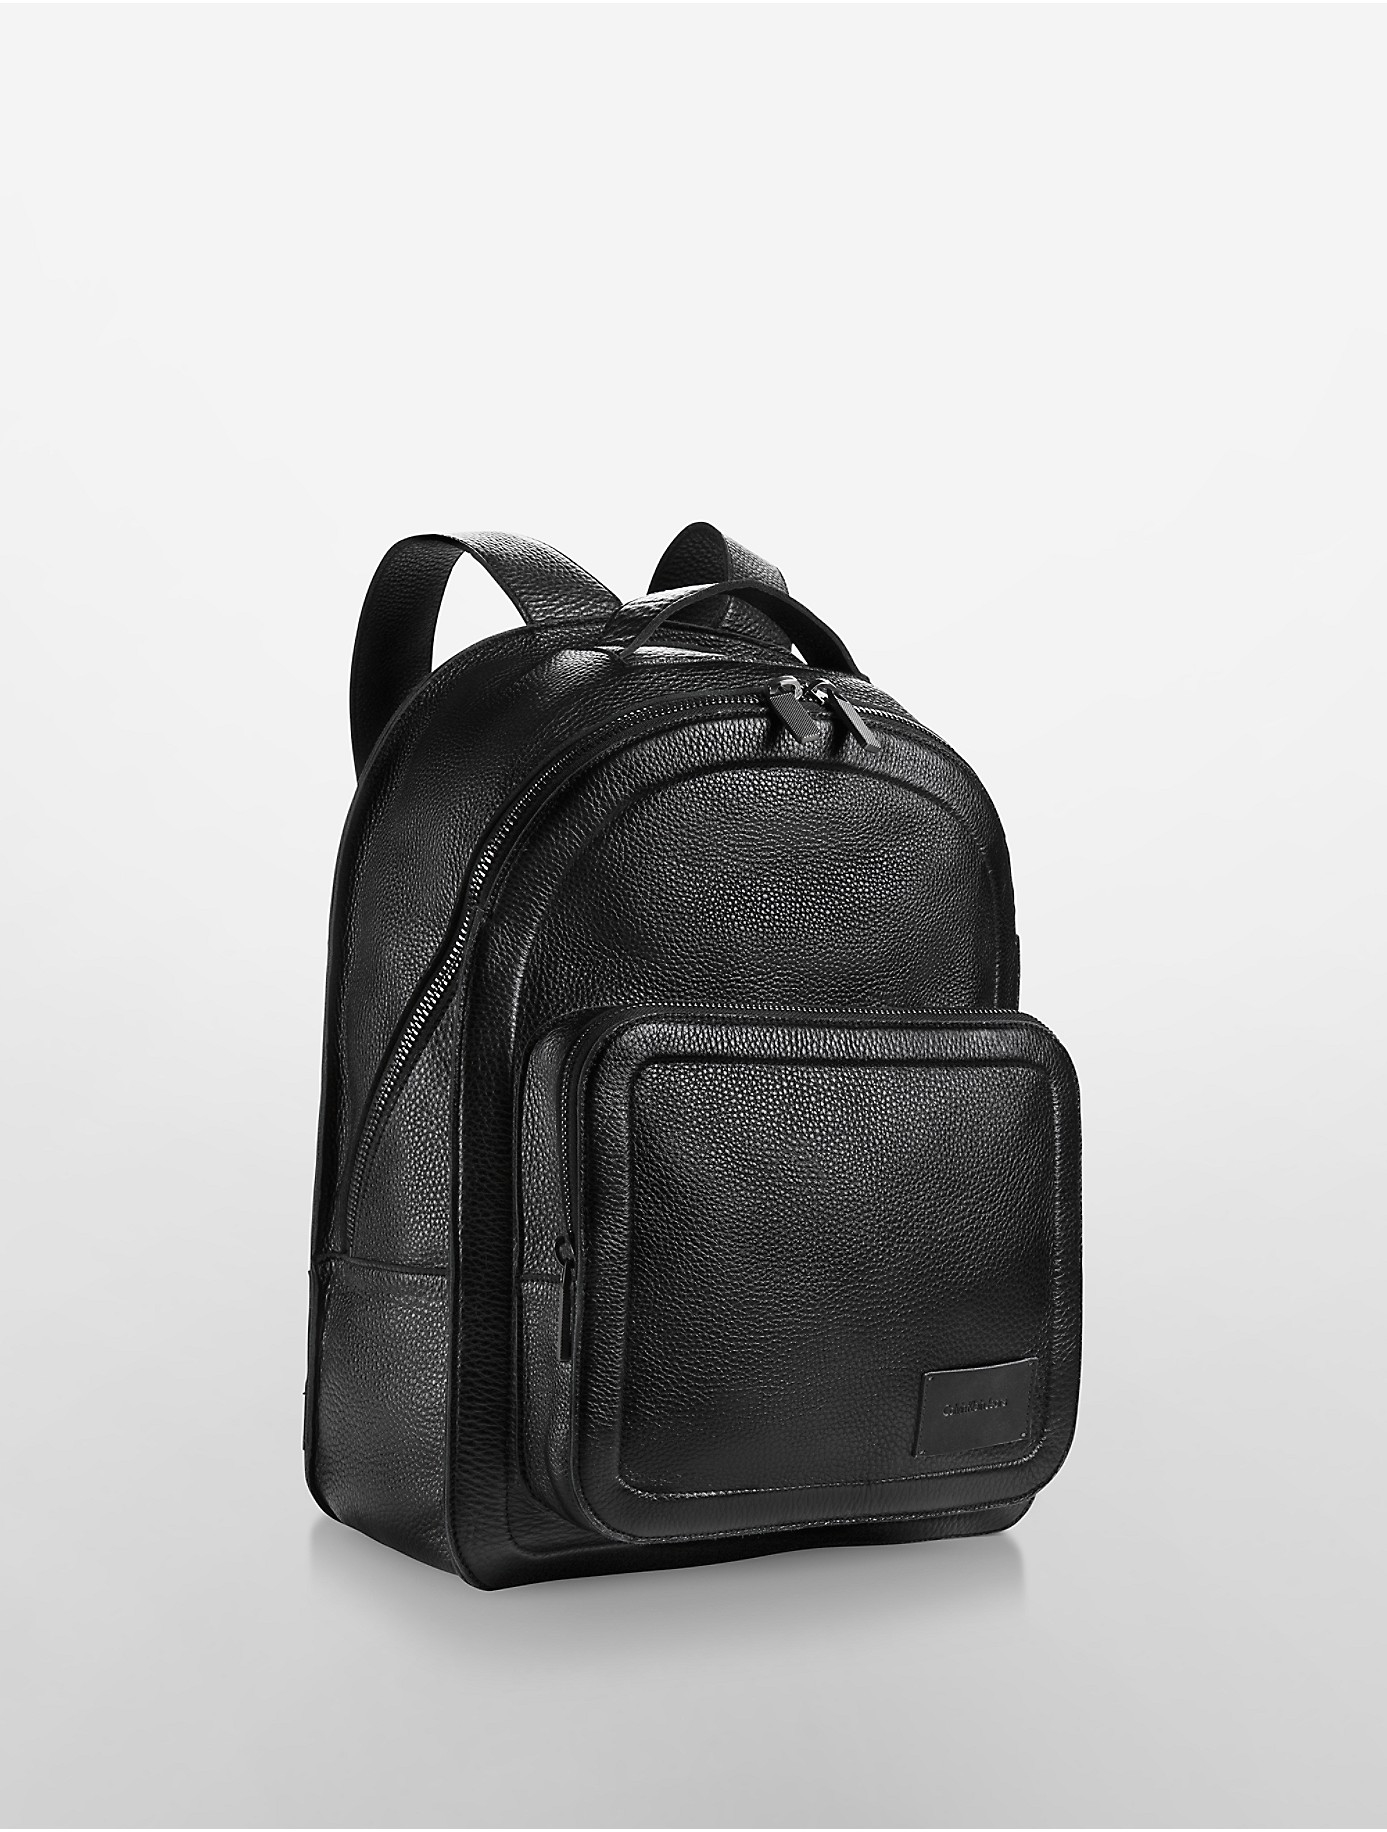 Lyst - Calvin Klein Jeans Infinite Leather Backpack in Black